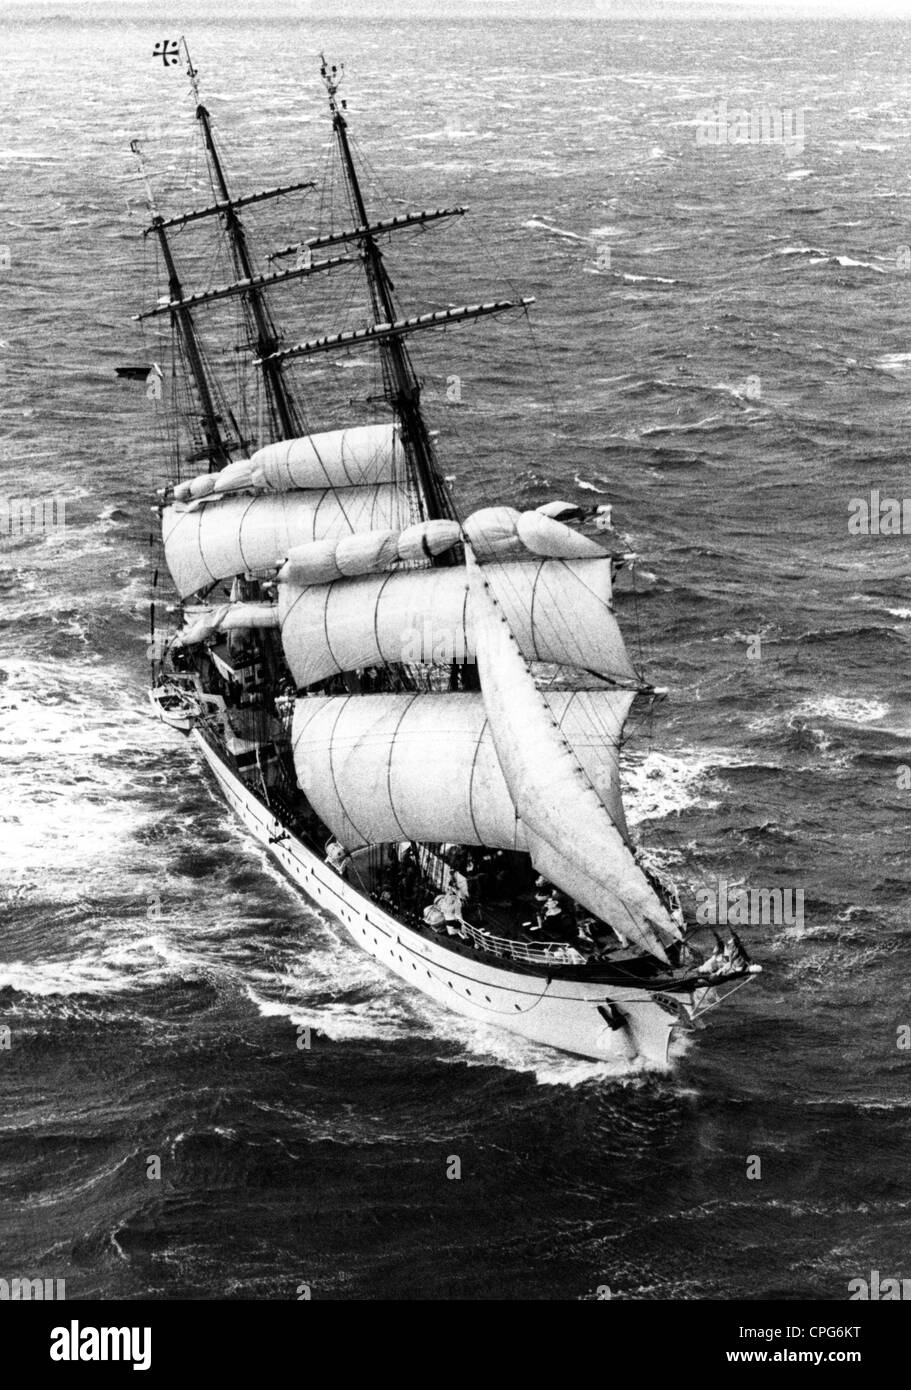 military, Germany, Bundeswehr, Navy, sailing school ship "Gorch Fock" (1958), with reefed sail on sea, areal view, circa 1990, Additional-Rights-Clearences-Not Available Stock Photo